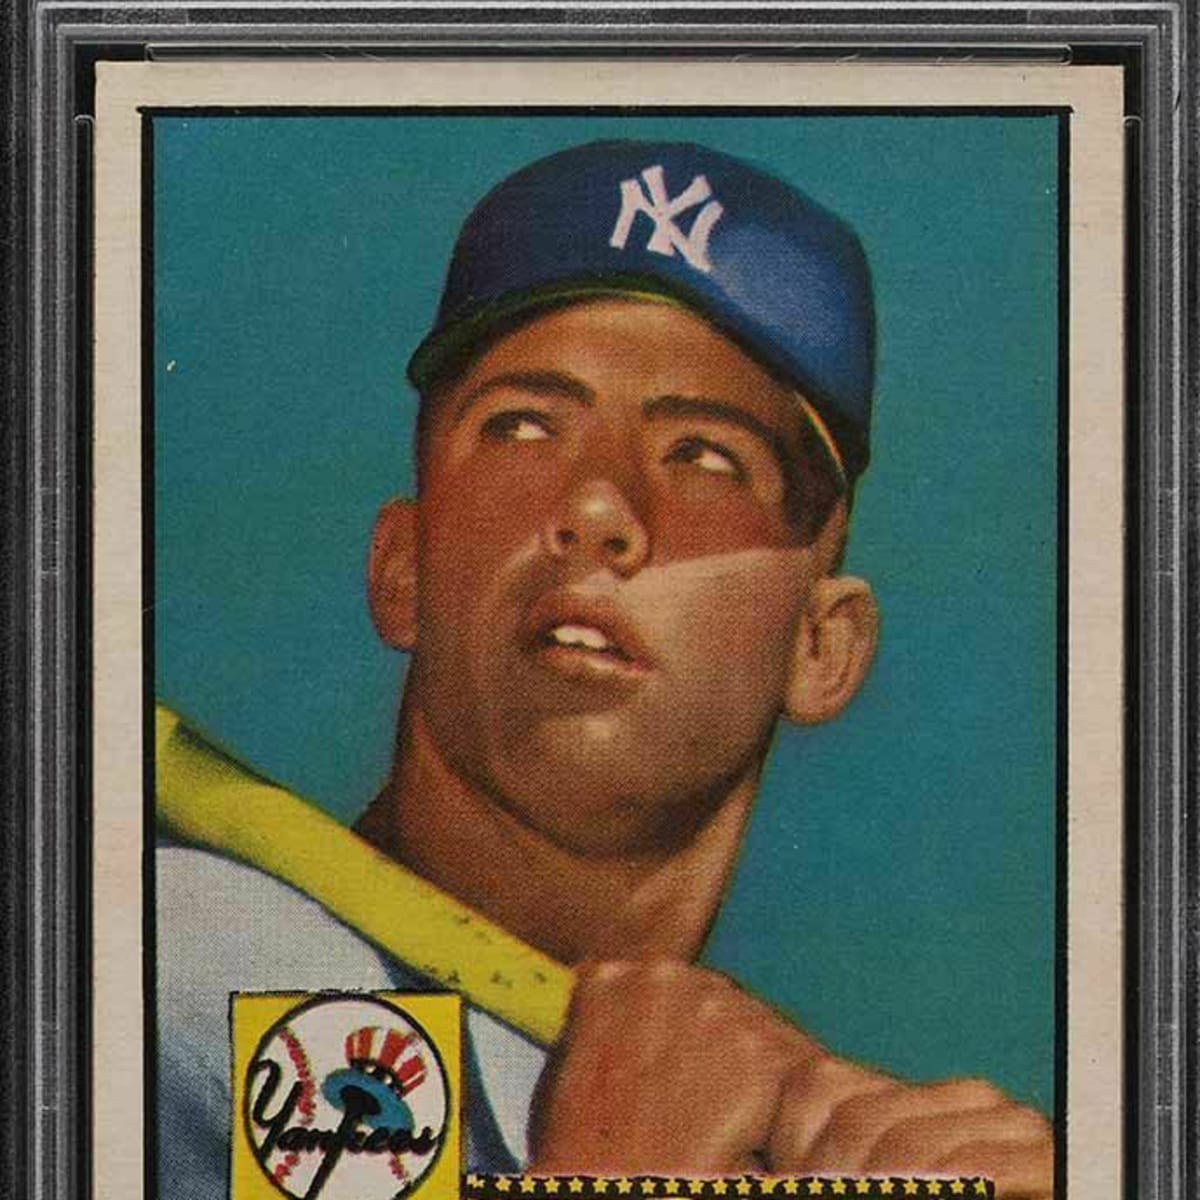 1952 Topps Mickey Mantle and 1961 Topps Mickey Mantle - Vintage